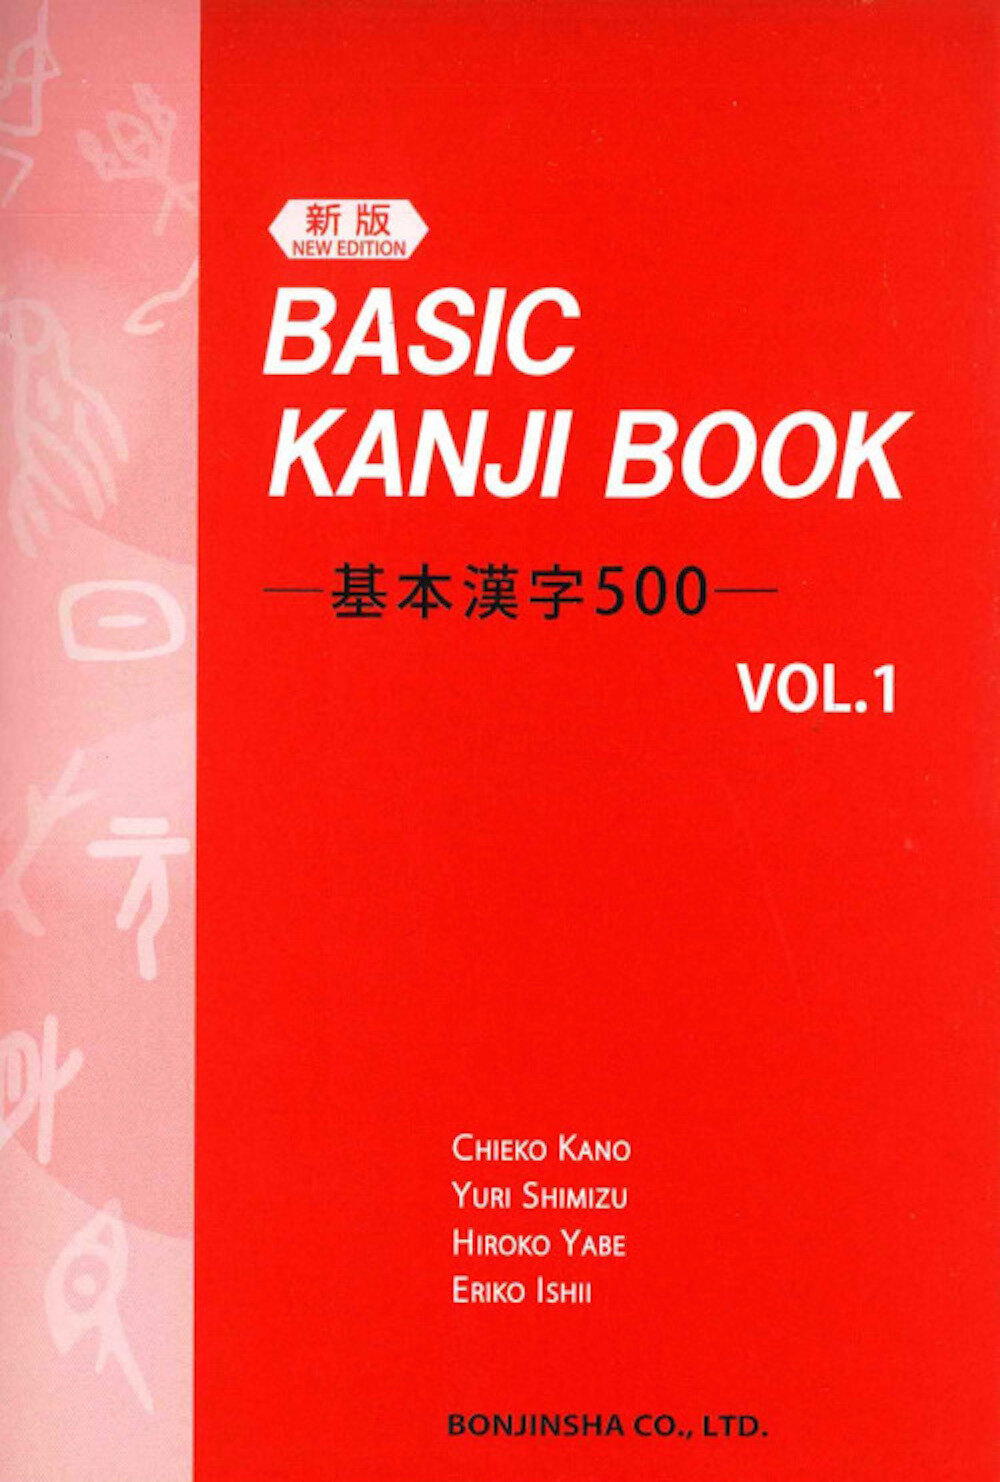 Japanese Books You Can Enjoy 